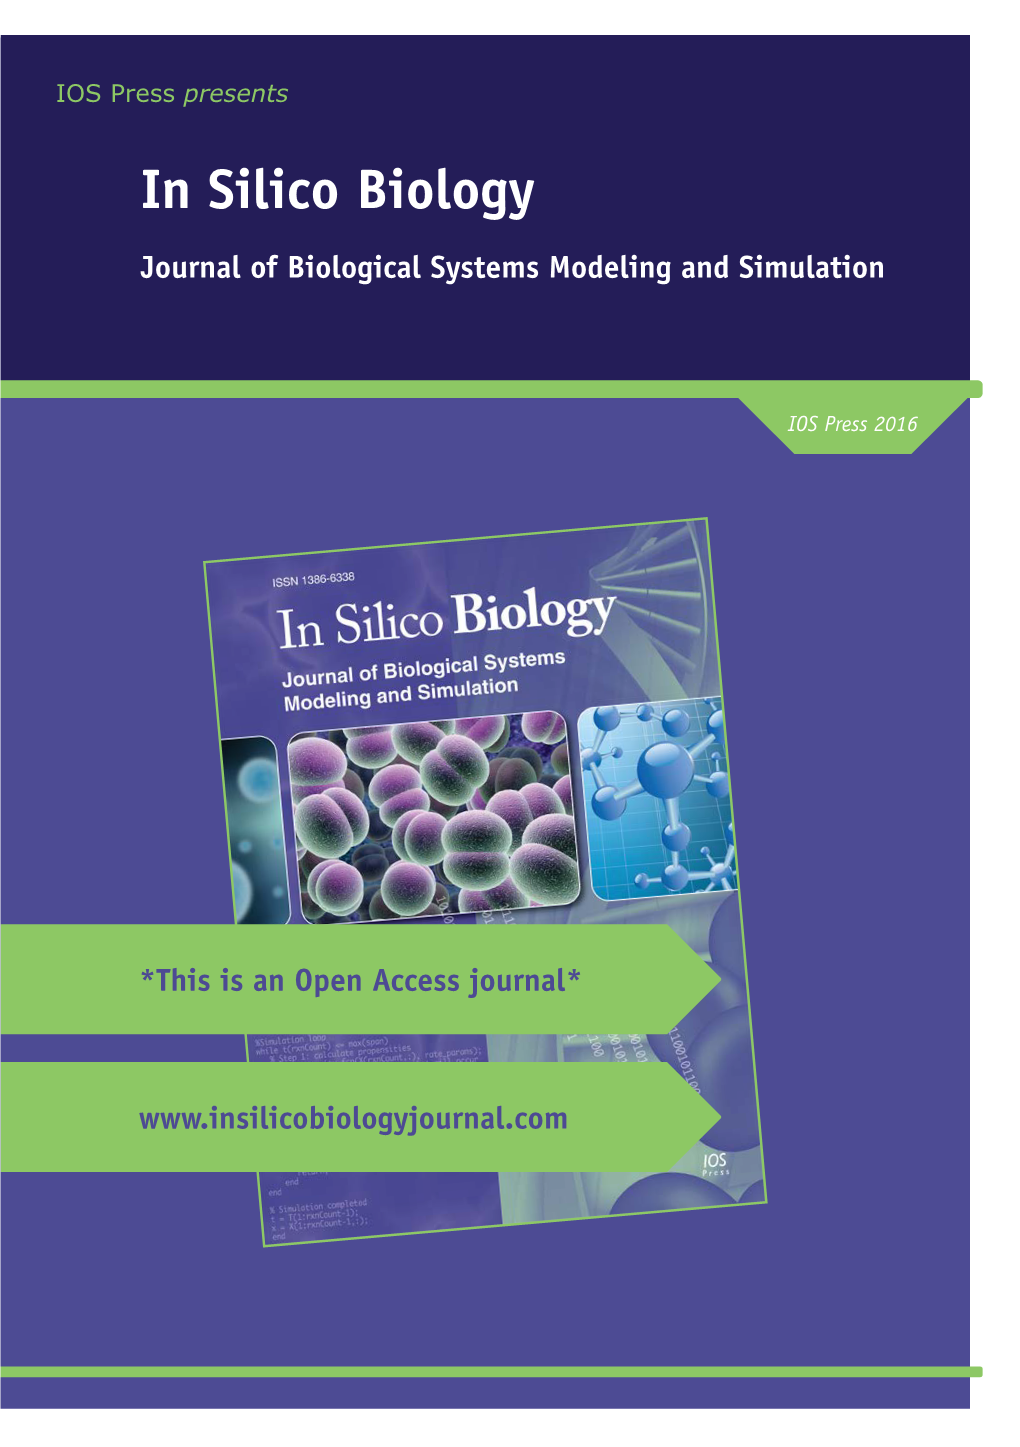 In Silico Biology Journal of Biological Systems Modeling and Simulation